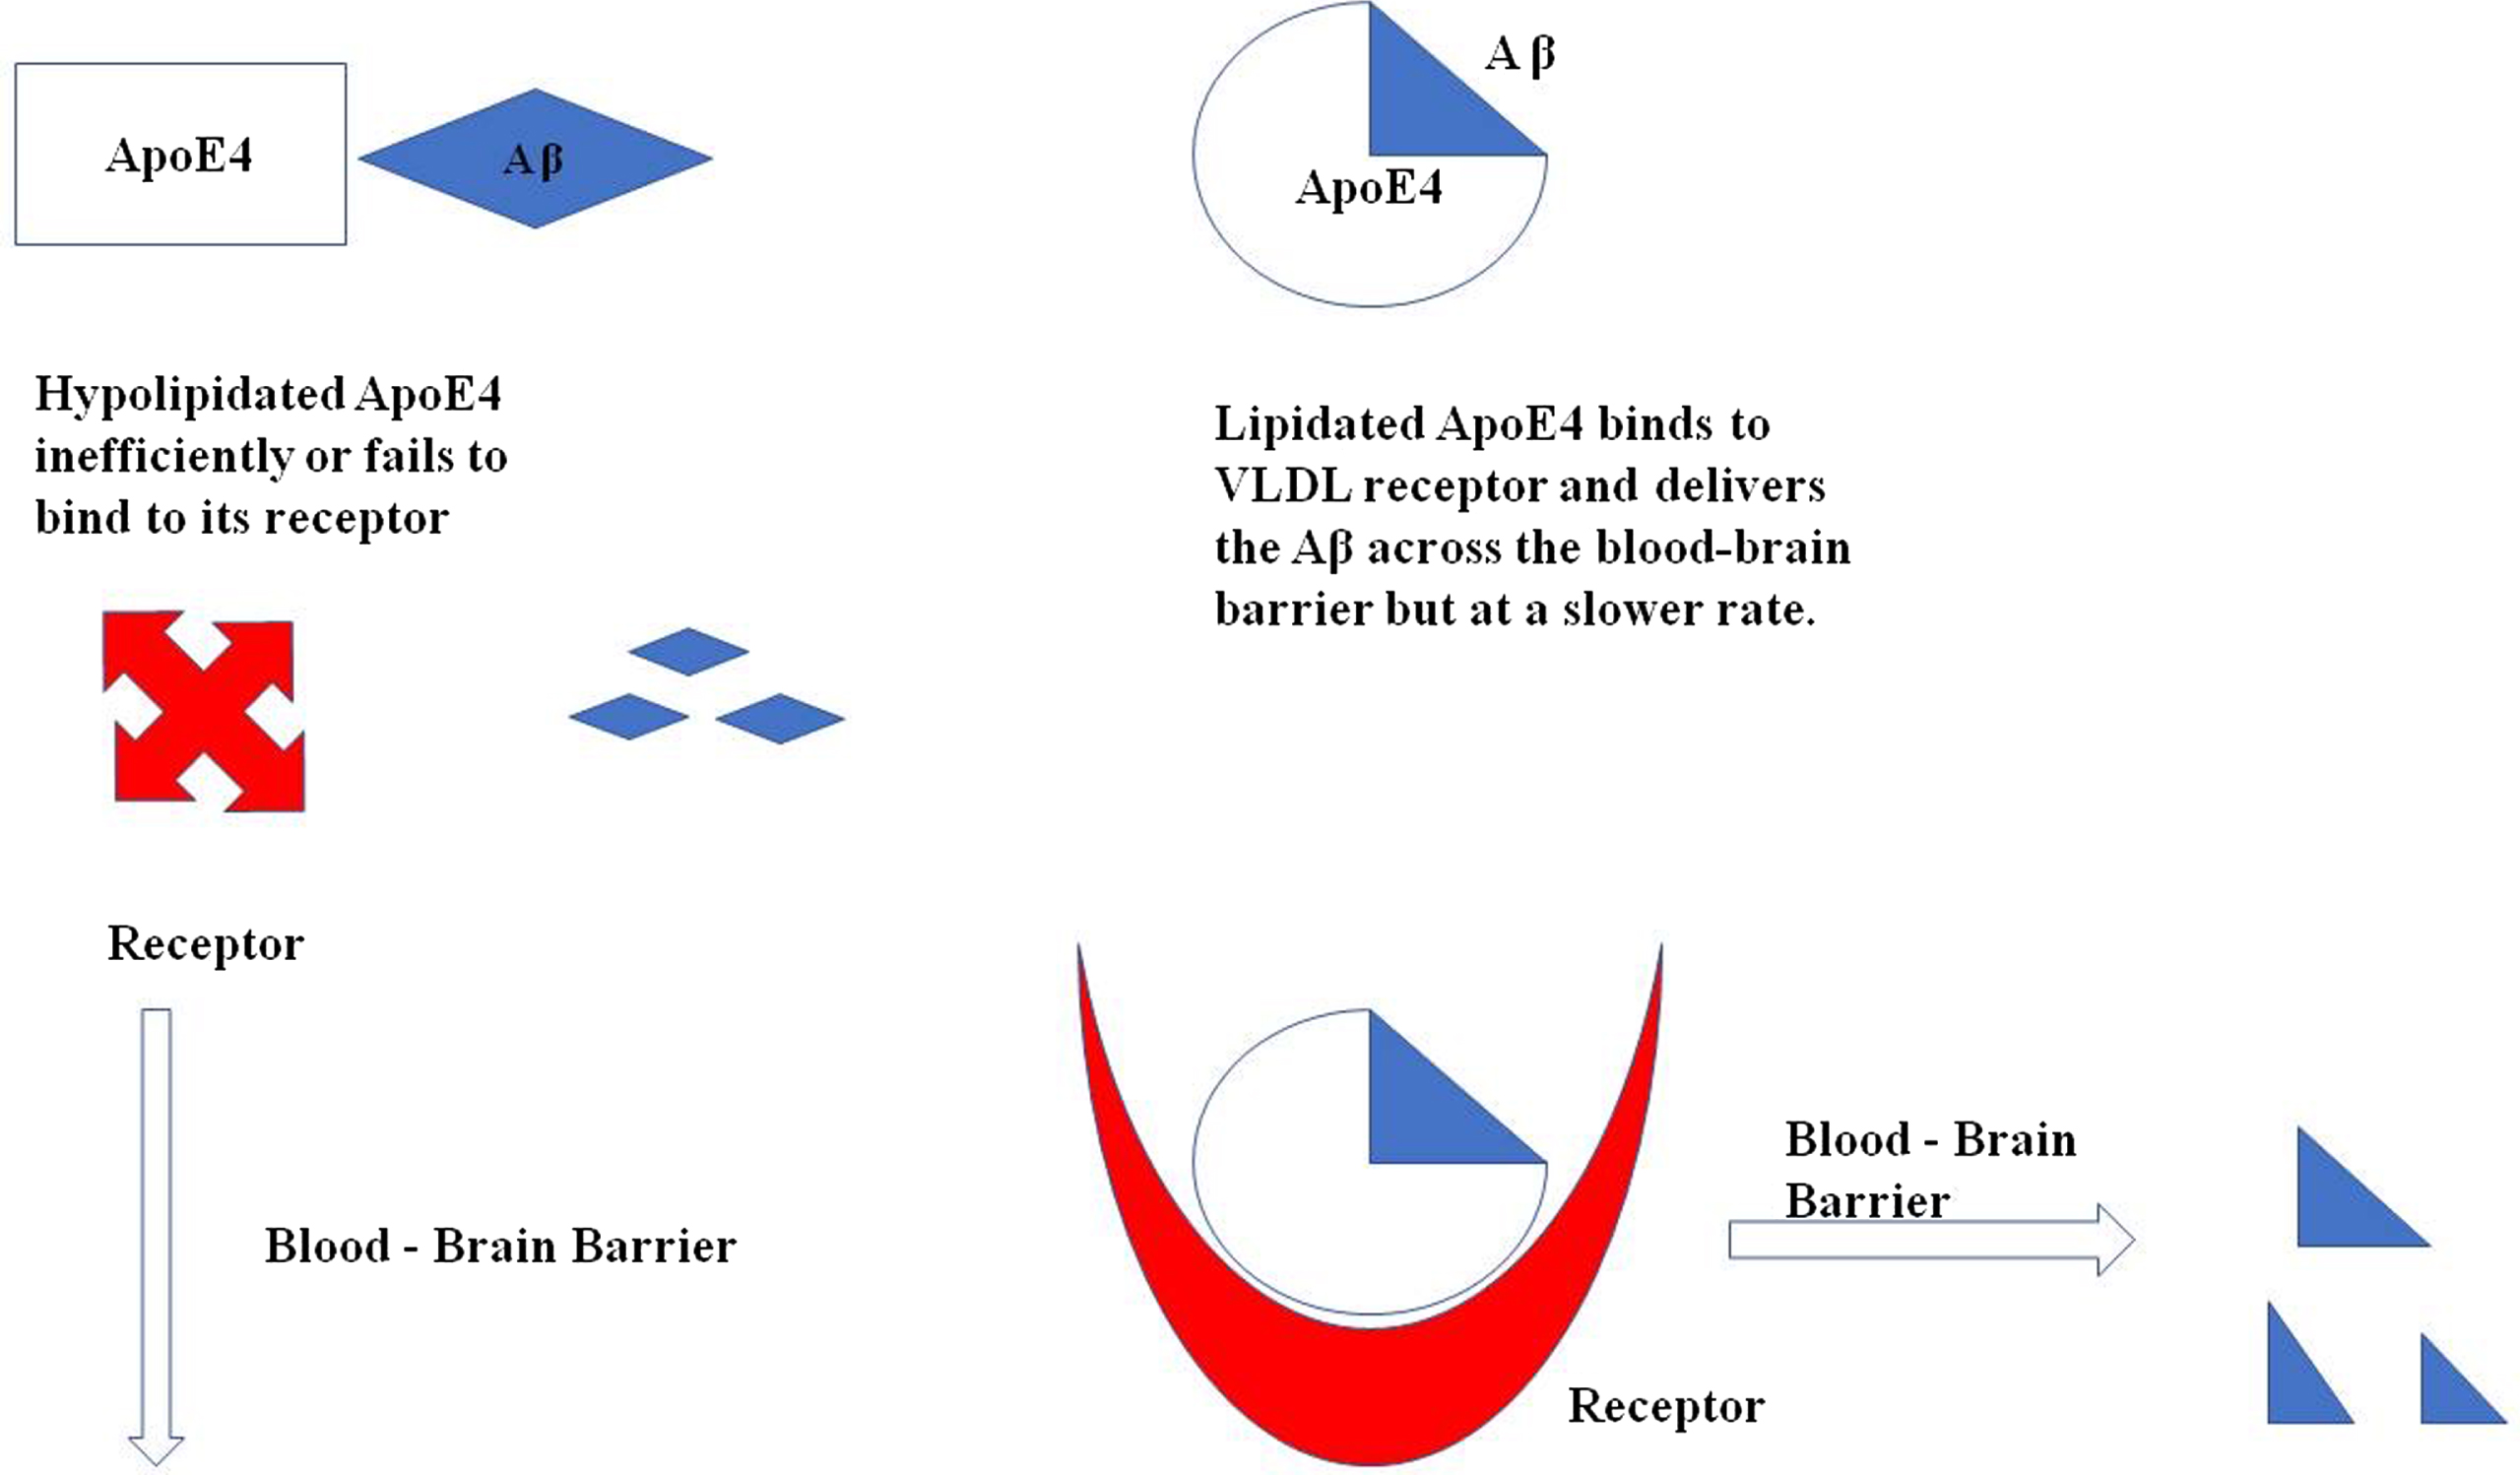 Illustration of ApoE4 binding with Aβ for its clearance across the blood-brain barrier. In a hypolipidated state ApoE4 fails to transport the Aβ across the cells as it does not bind to its receptor as efficiently as required, whereas the lipidated ApoE4 binds to its receptor VLDL and delivers the Aβ across the cells.